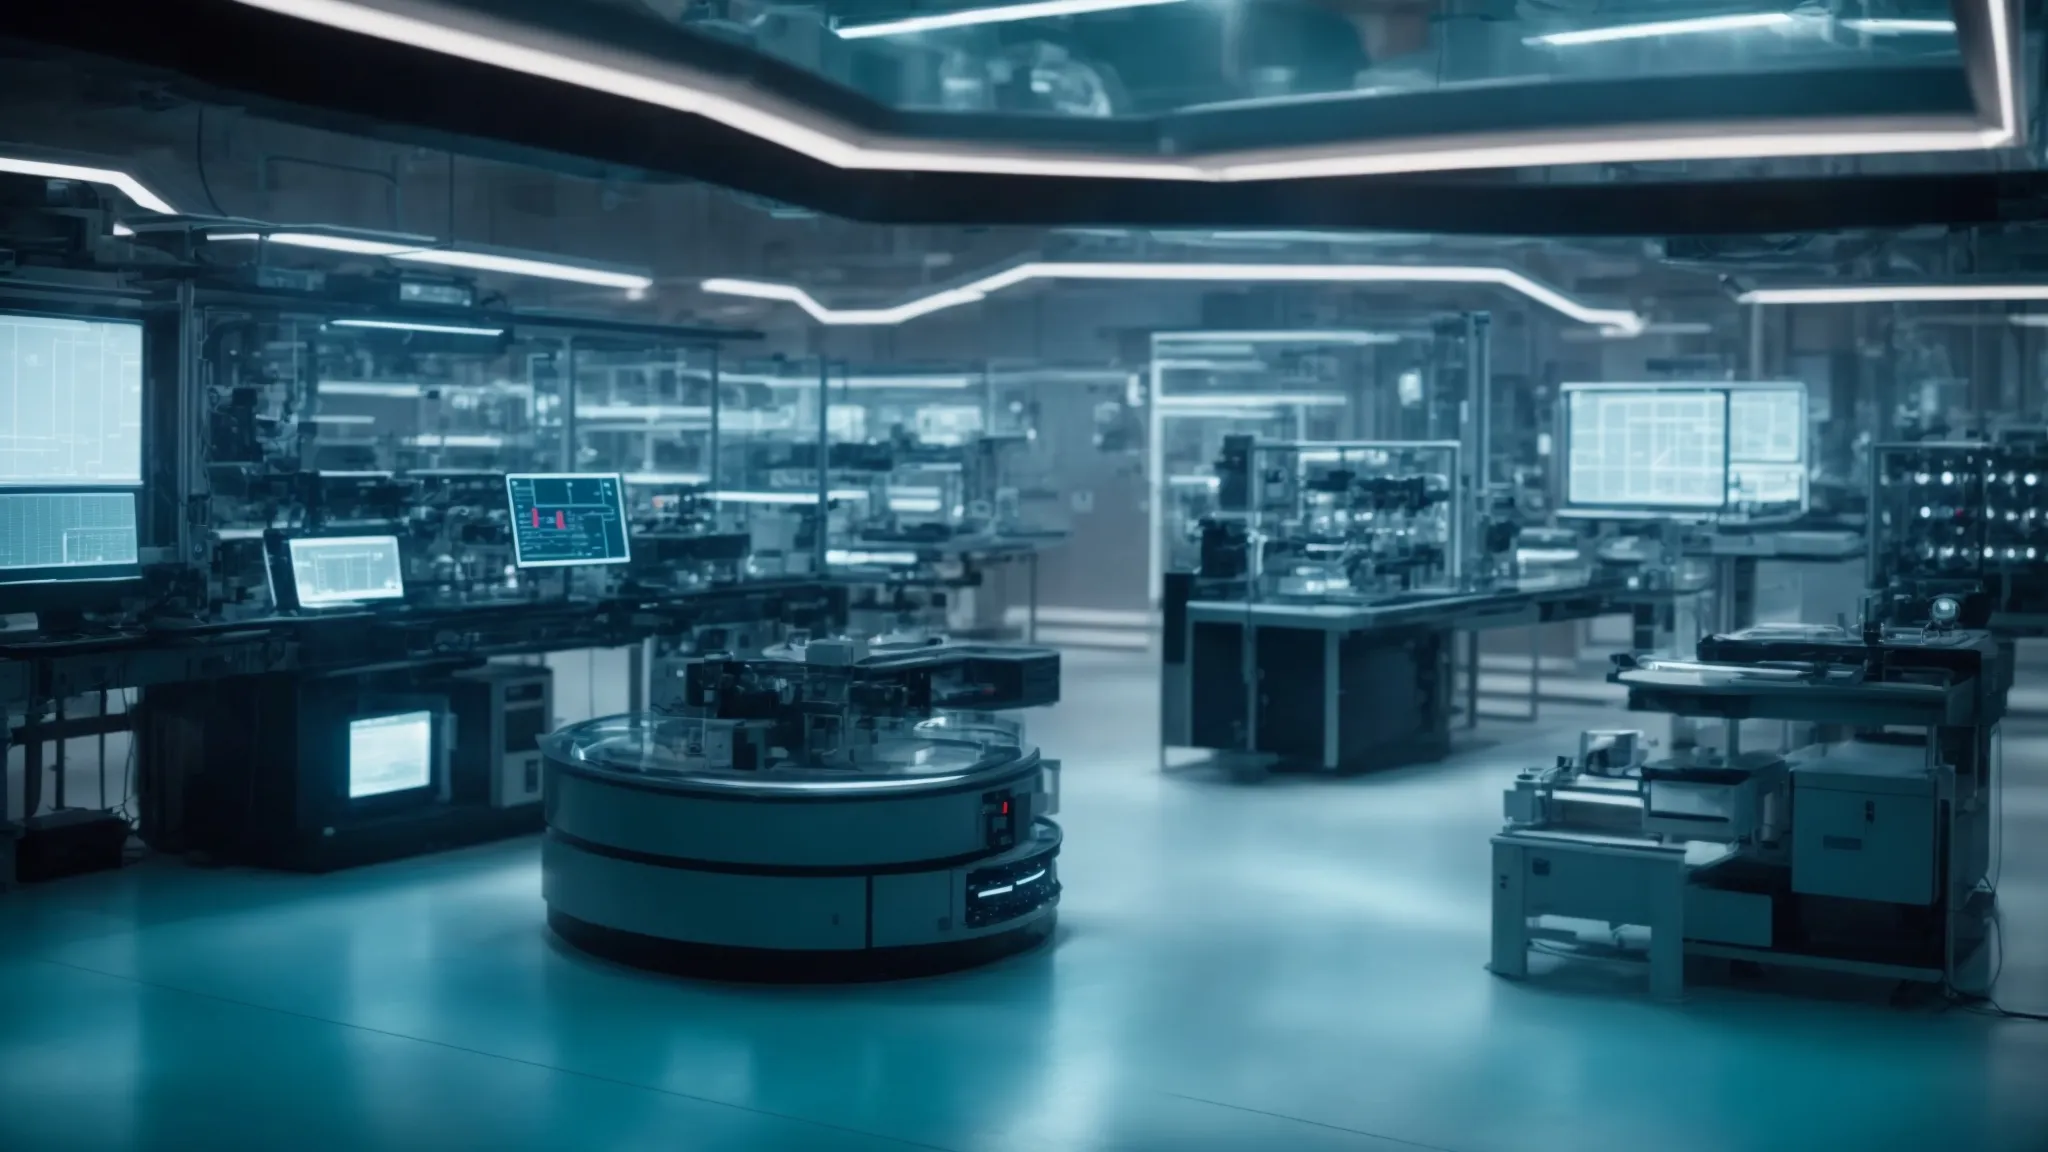 a futuristic laboratory filled with high-tech equipment and glowing screens, symbolizing the modern continuation of past scientific achievements.